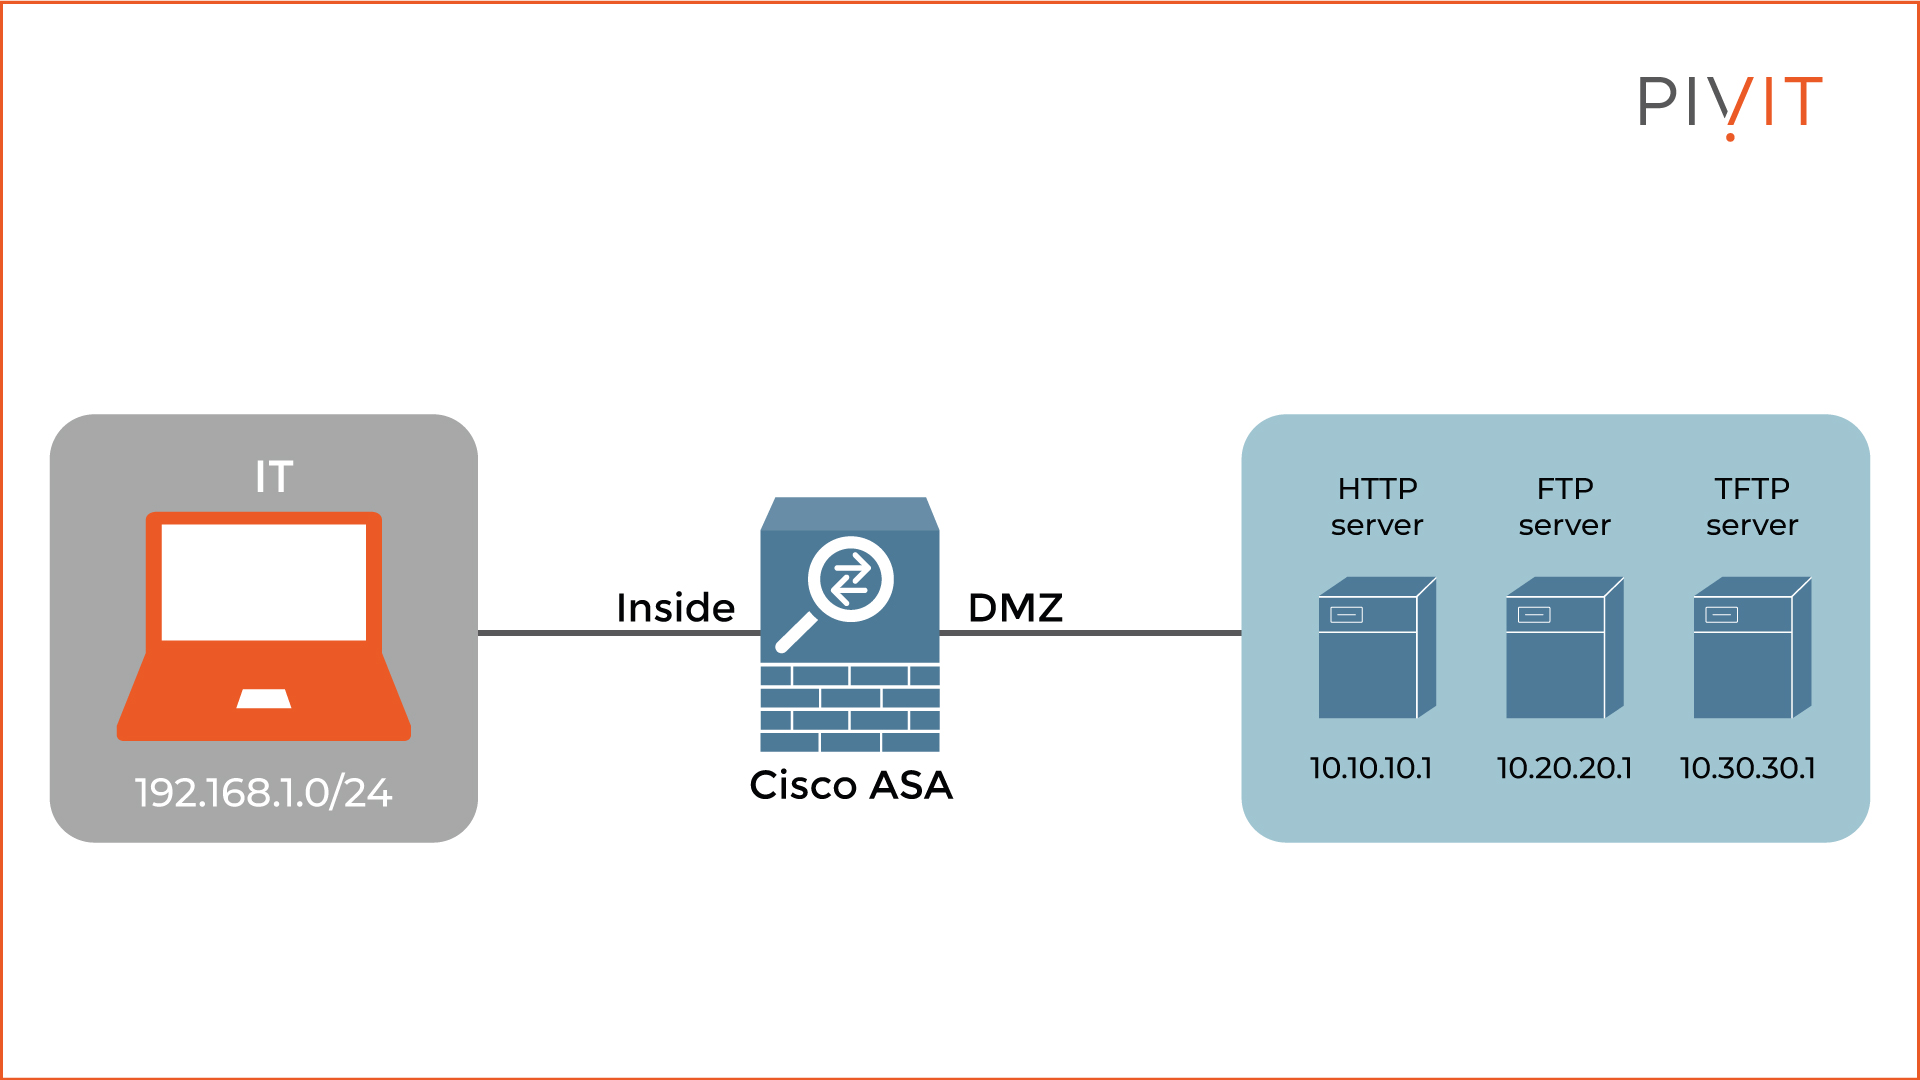 A topology design representing the IT network connected on the inside interface and the three servers in the DMZ zone